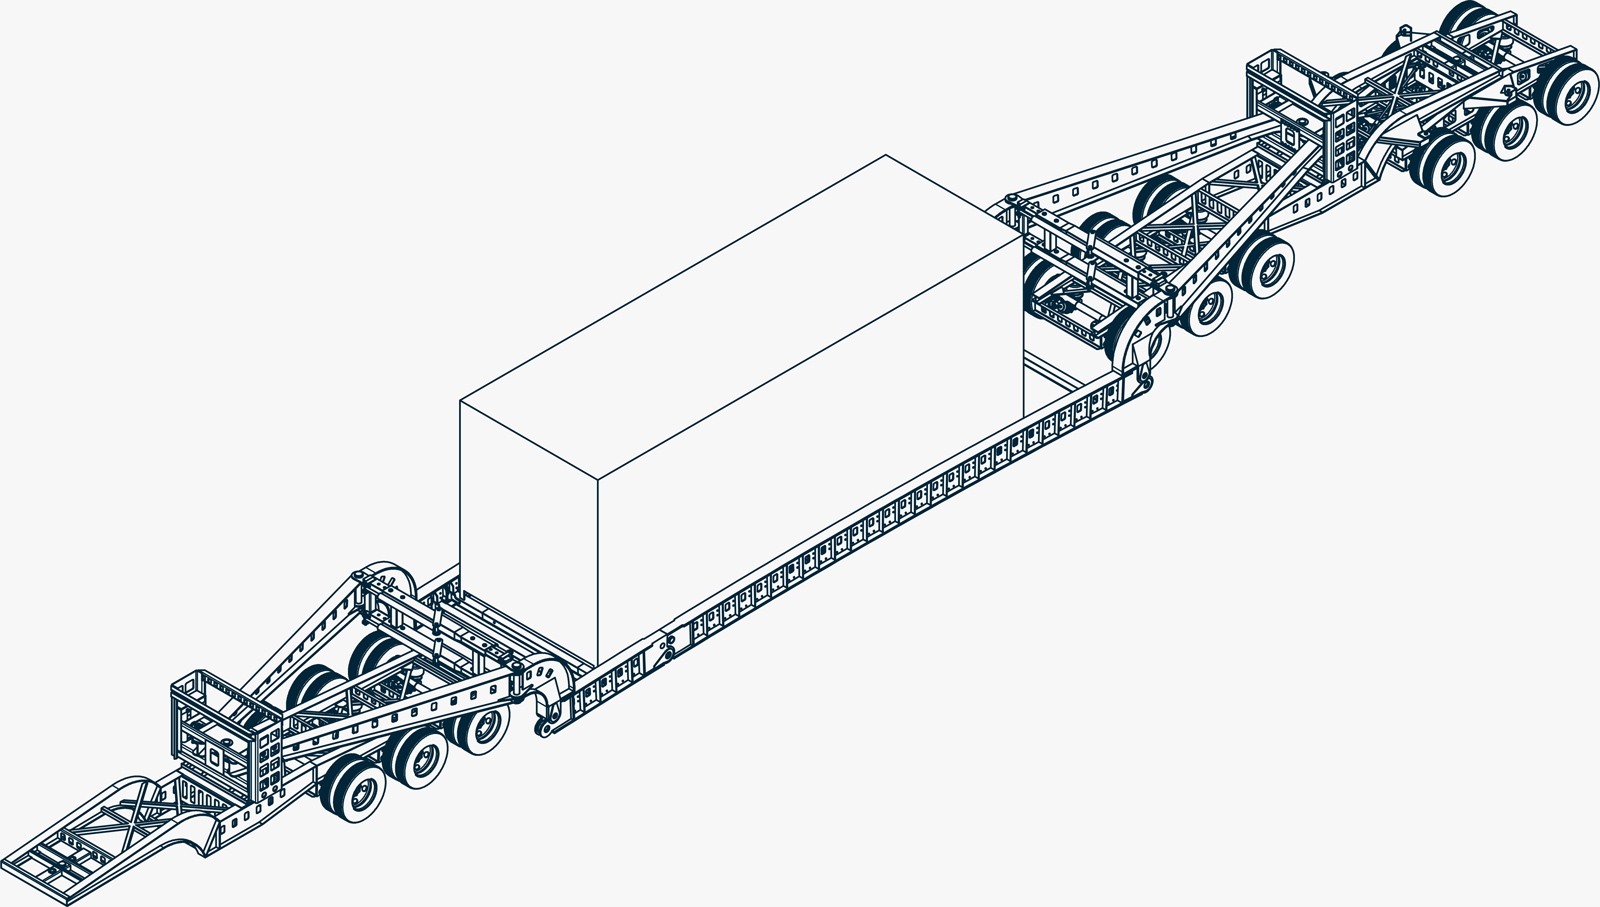 A mechanical drawing of a perimeter 13 axle trailer shown in an isometric view.